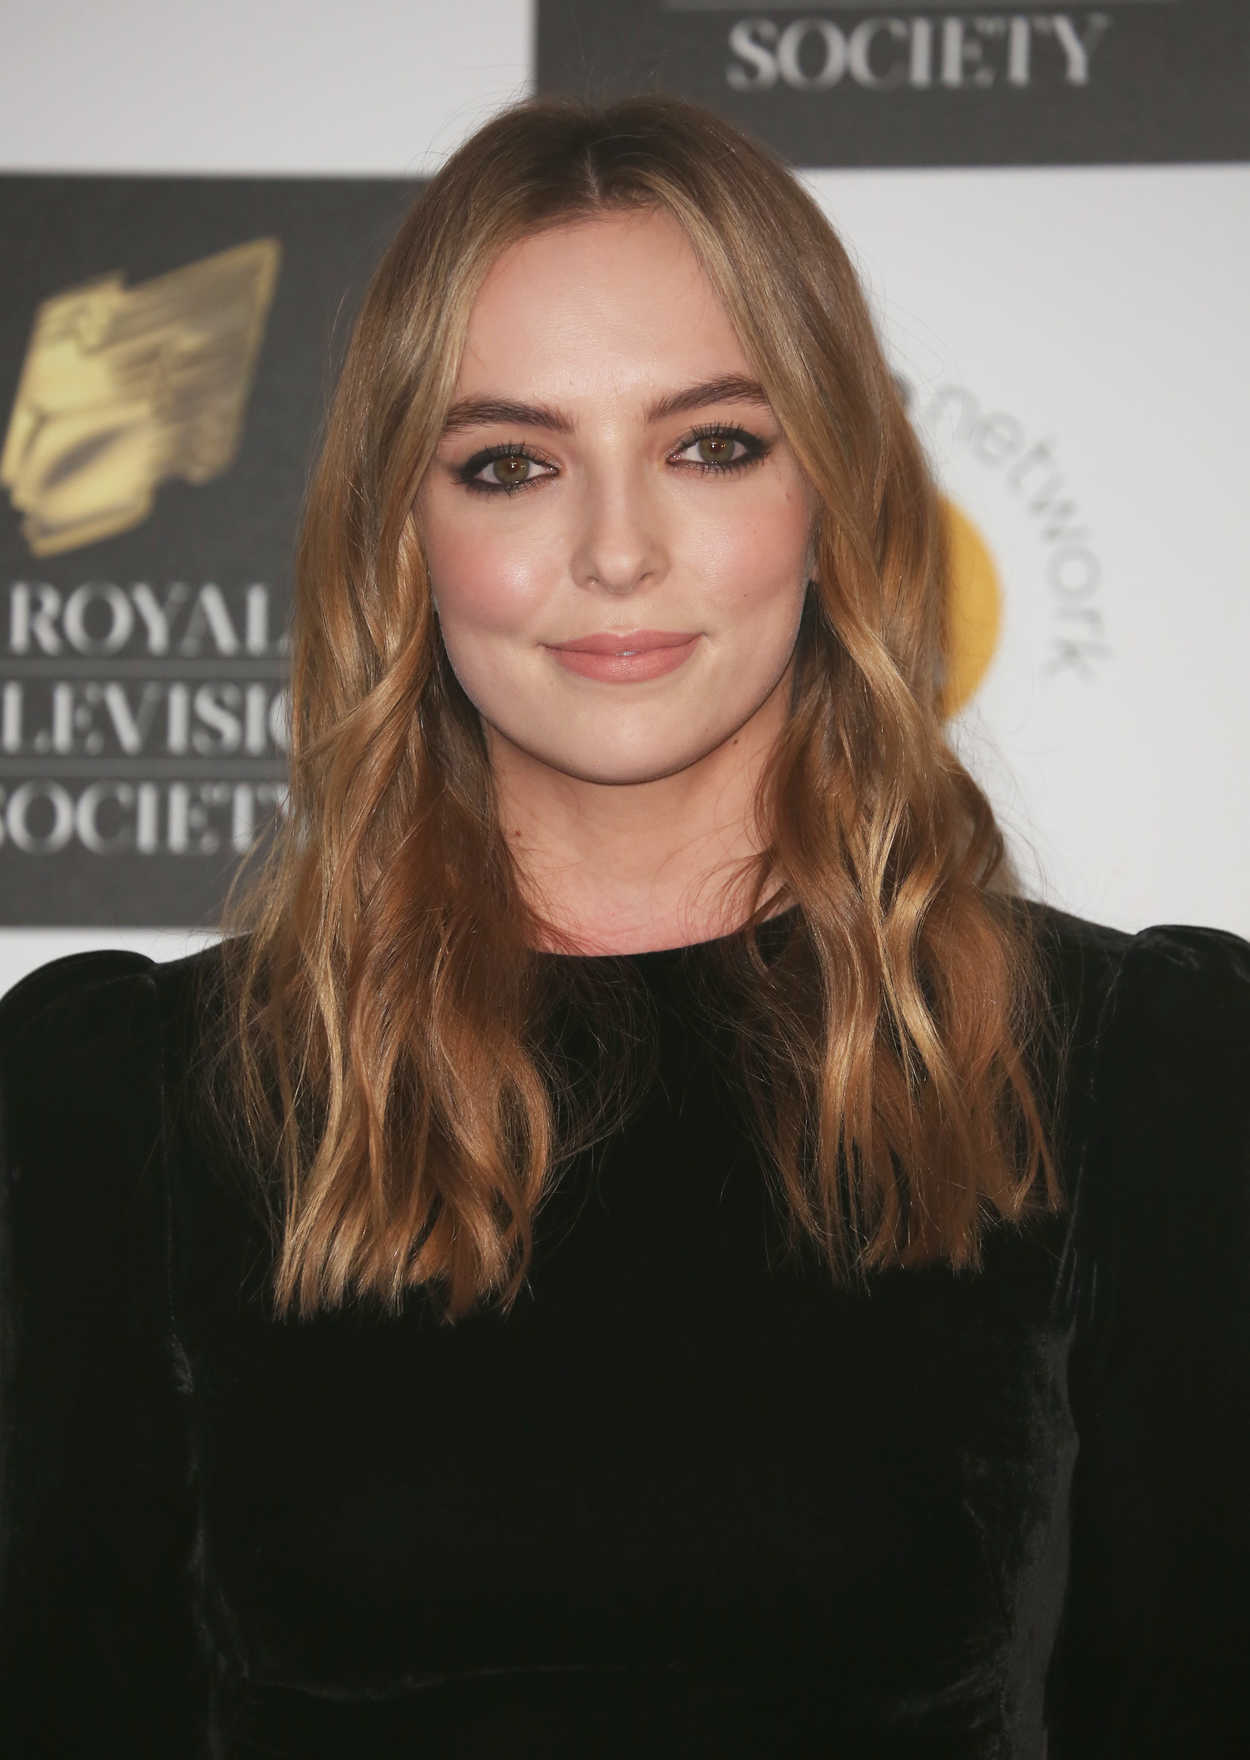 Jodie Comer Attends 2019 Royal Television Society Awards in London 03/19/2019 ...1250 x 1760